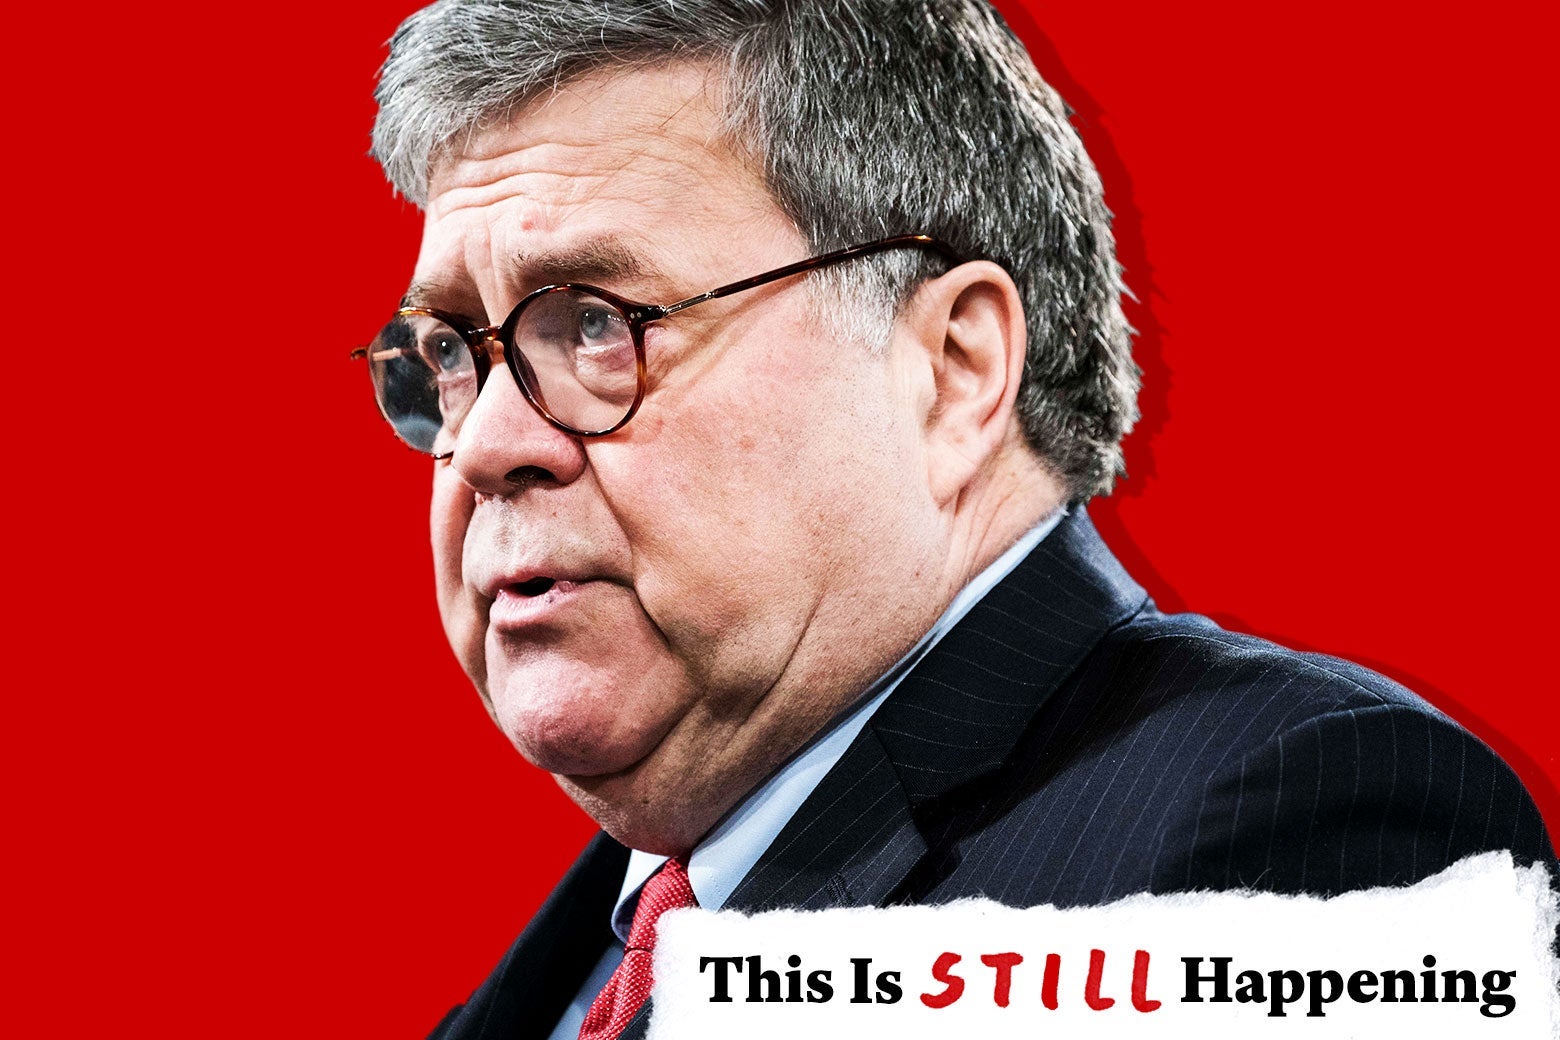 William Barr against a red background with text in the lower right that says, "This Is Still Happening."